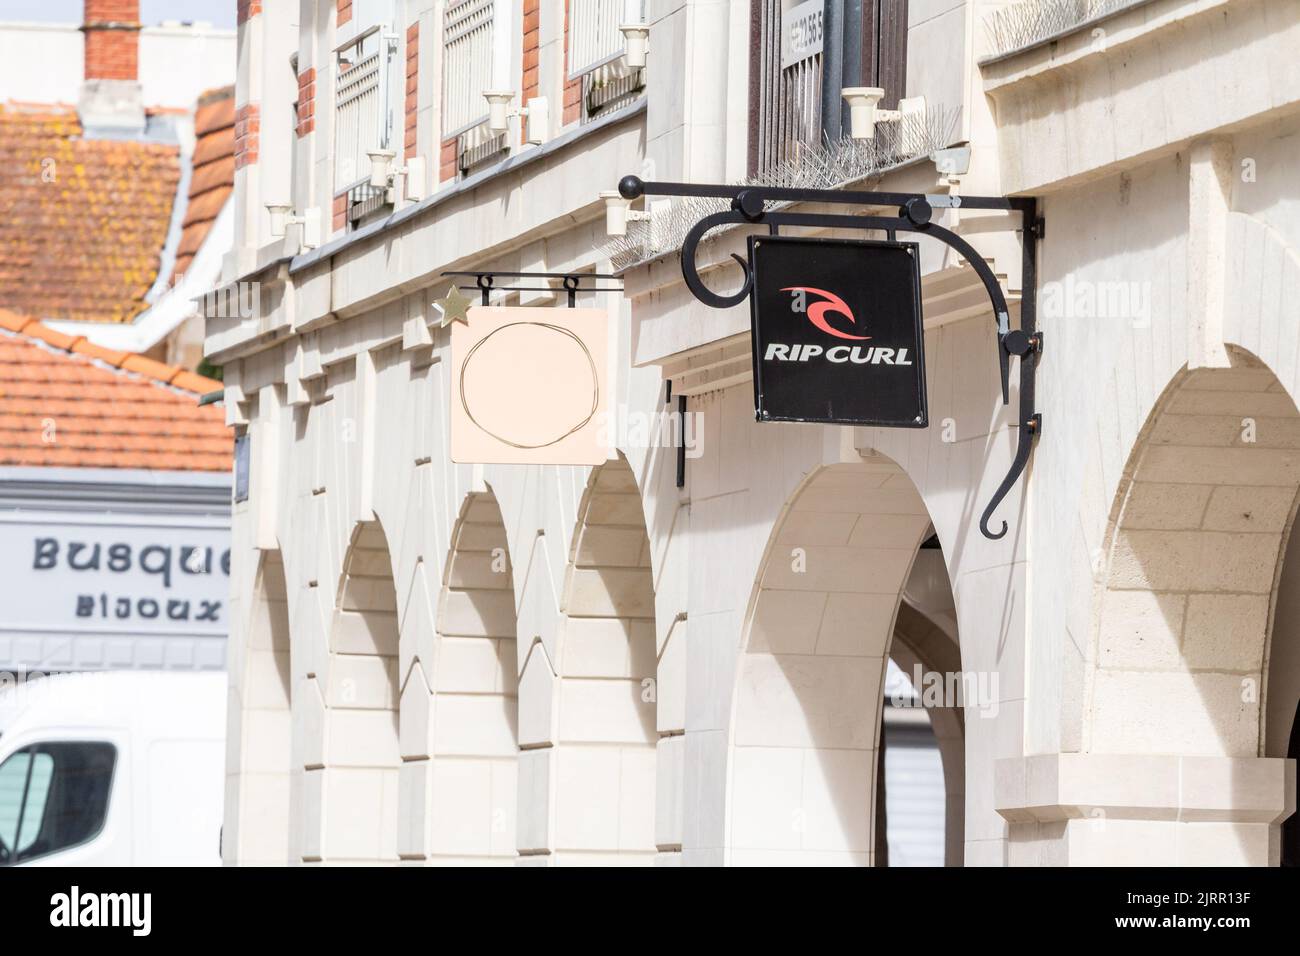 Picture of a sign with the logo of Rip Curl on their store in Bordeaux, France. Rip Curl is a designer, manufacturer, and retailer of surfing sportswe Stock Photo